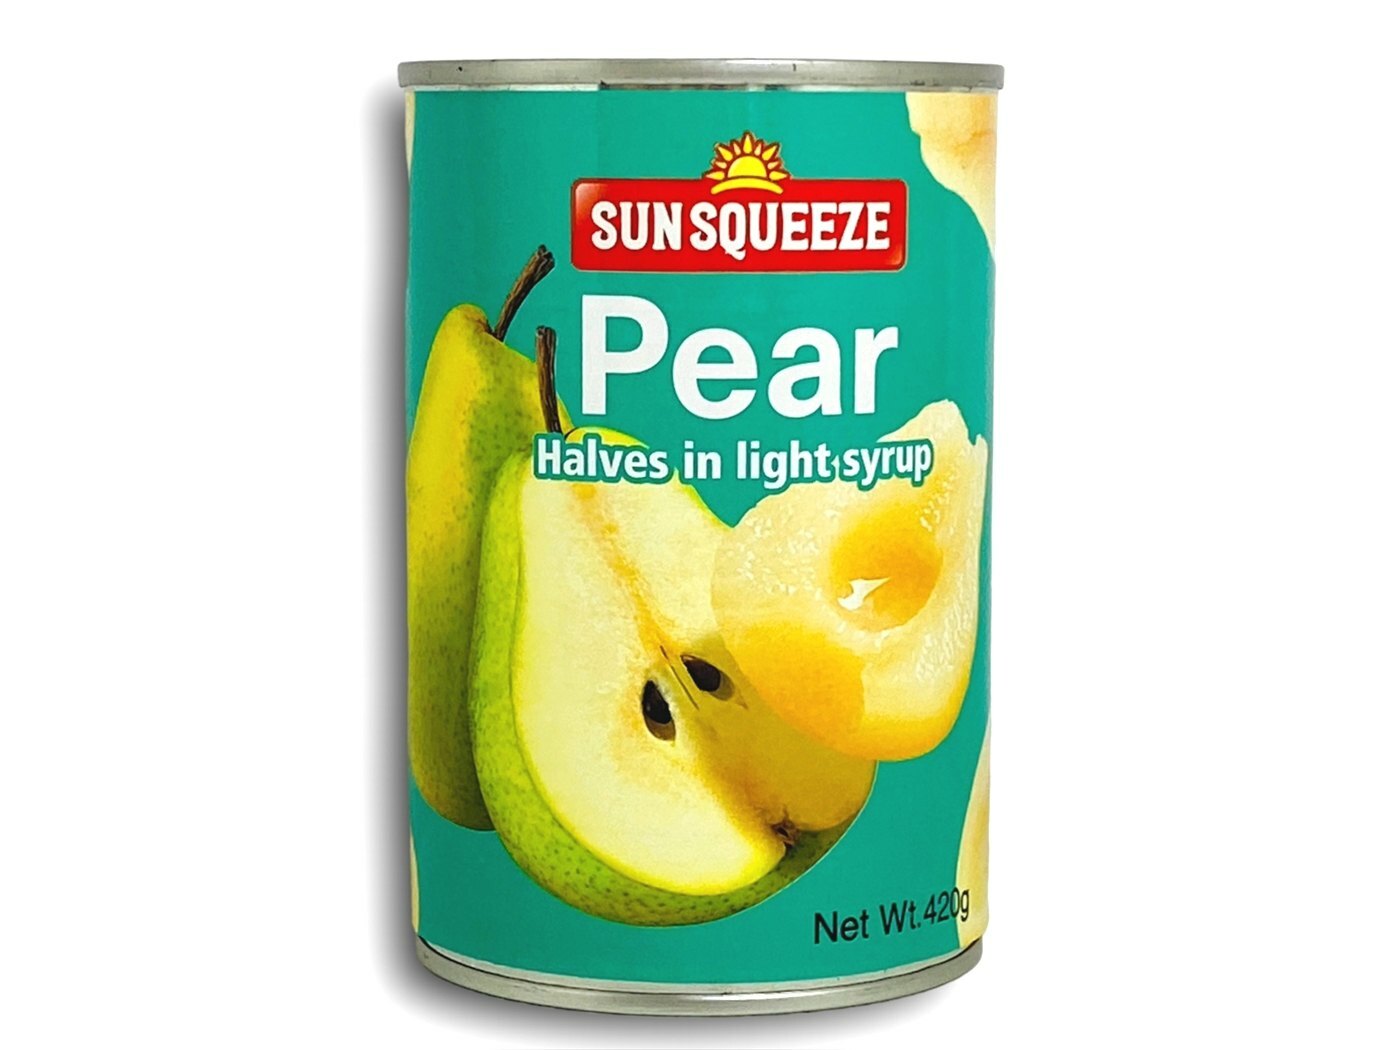 Sun Squeeze Pear Halves in light syrup